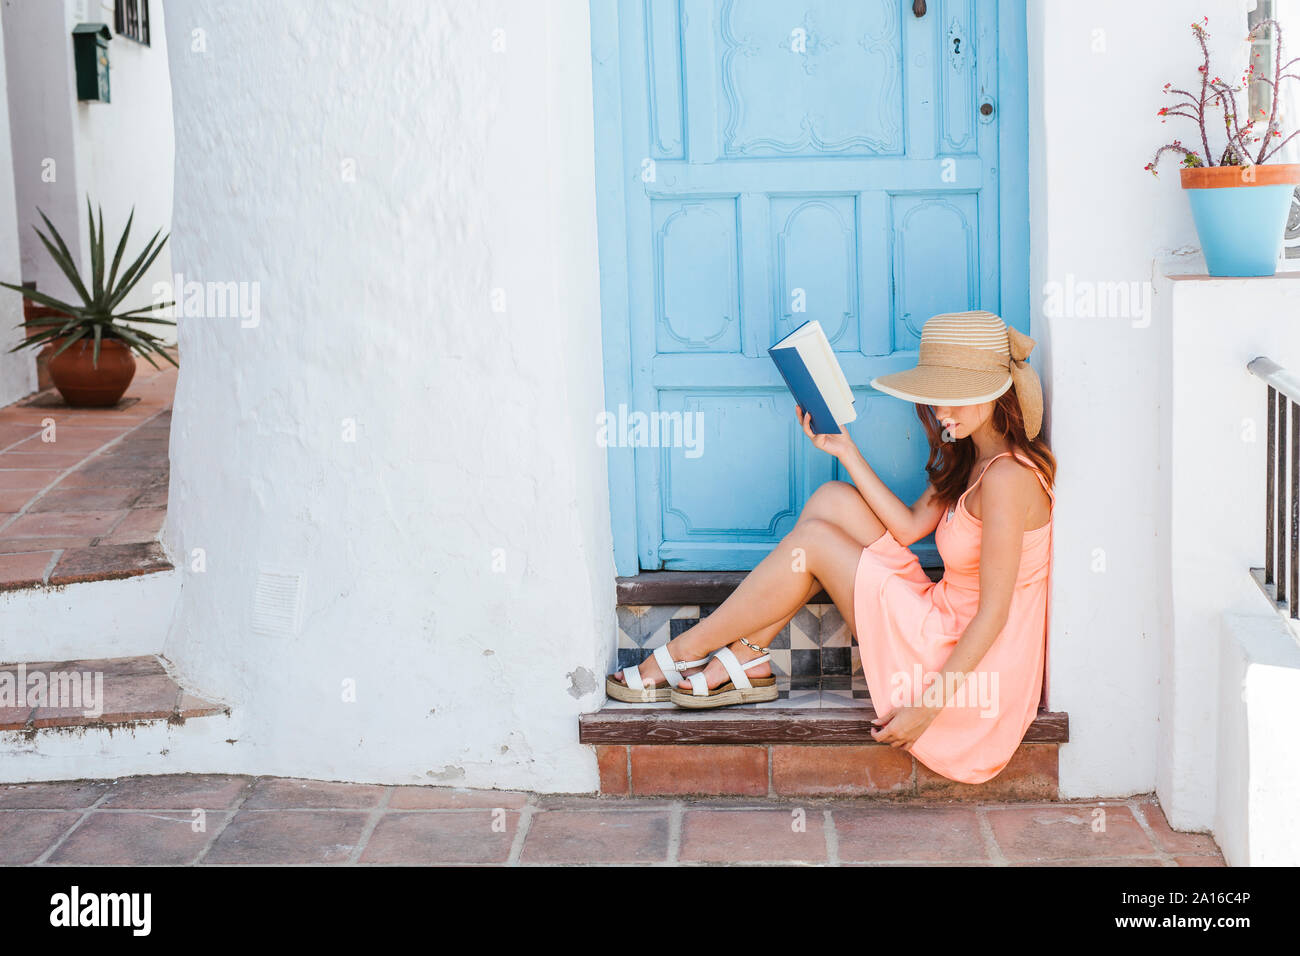 Young woman with book sitting on step of house entrance, Frigiliana, Malaga, Spain Stock Photo